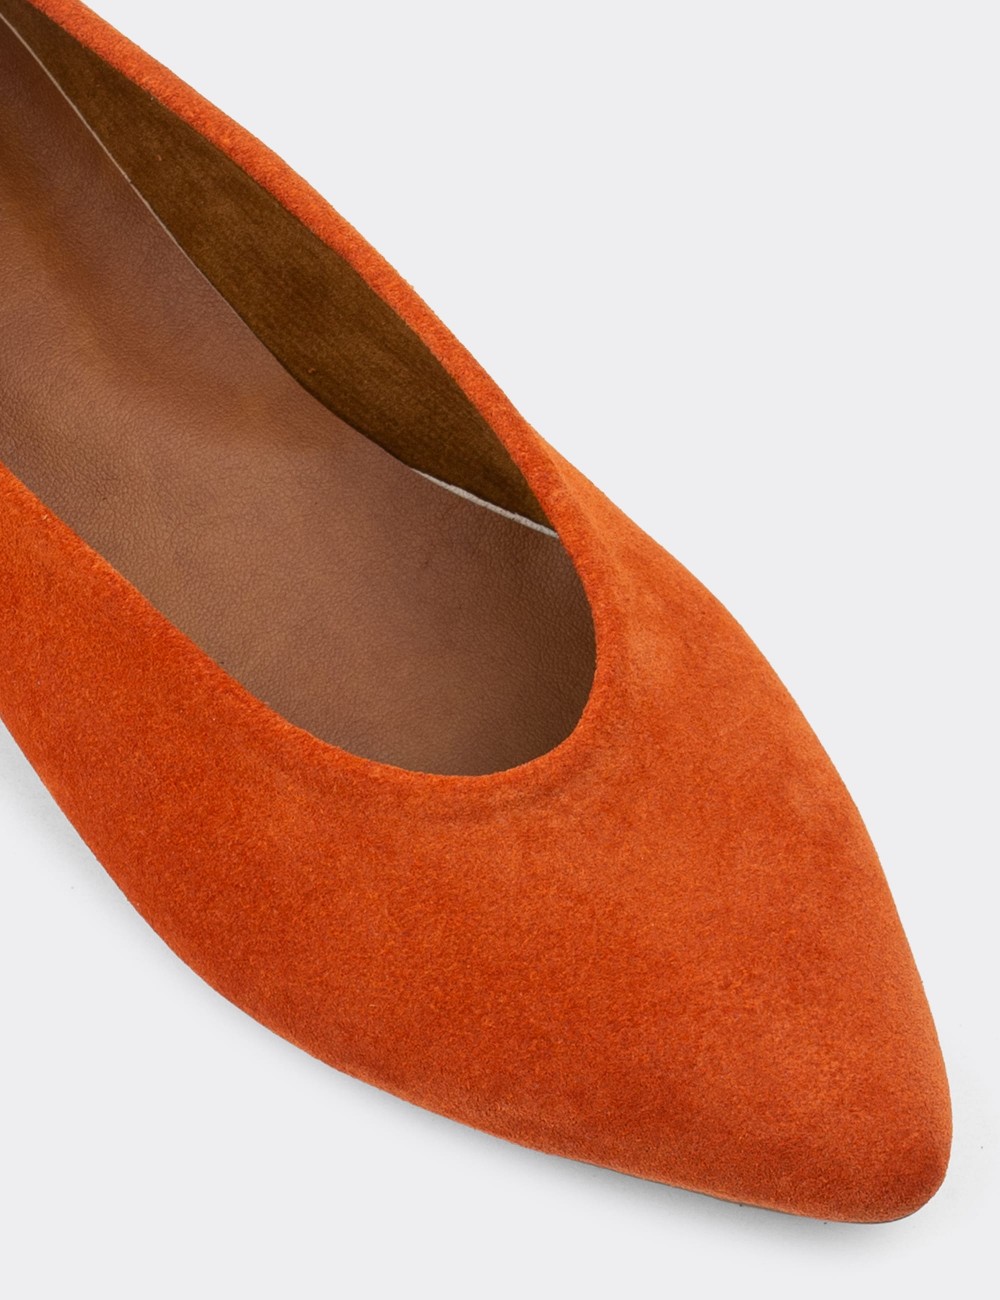 Orange Suede Leather Loafers - 01896ZTRCC01